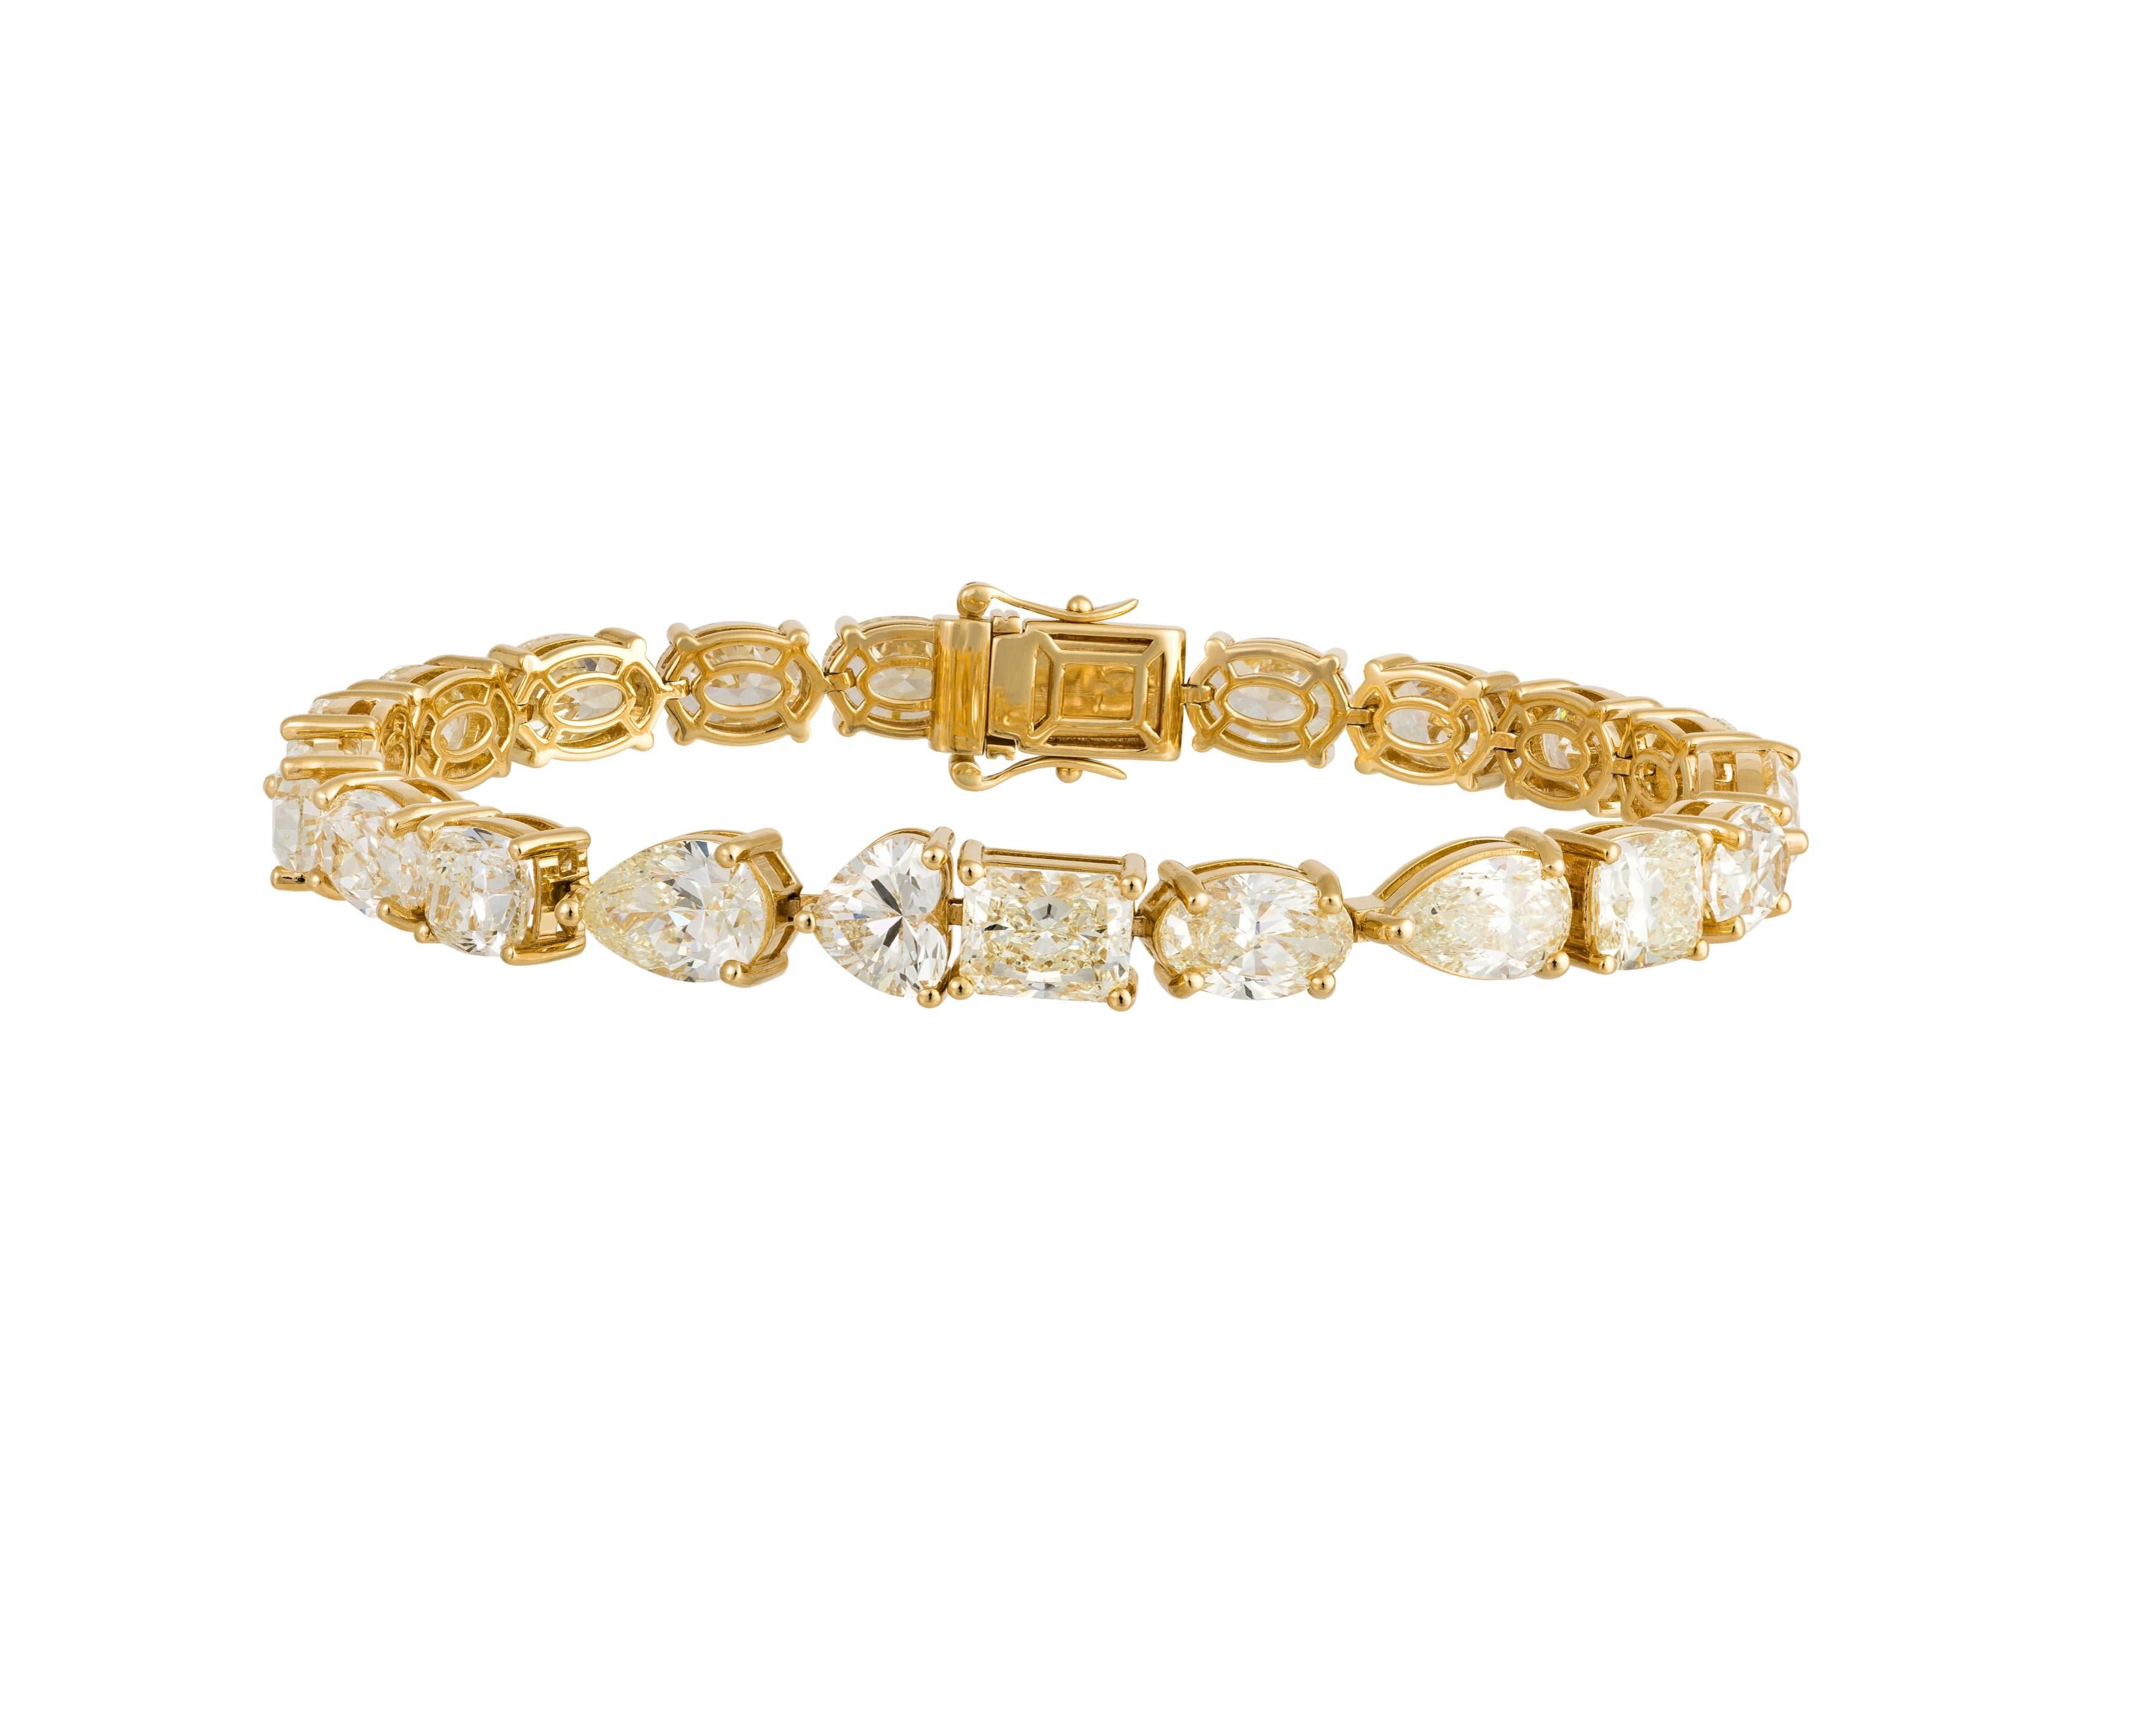 The Following Item we are offering is this Beautiful Rare Important 18KT Yellow Gold Large Glittering Fancy Cut Yellow Diamond Tennis Bracelet. Bracelet is comprised of over 23CTS Magnificent Rare Gorgeous Fancy Oval, Heart, Pear, & Emerald Cut